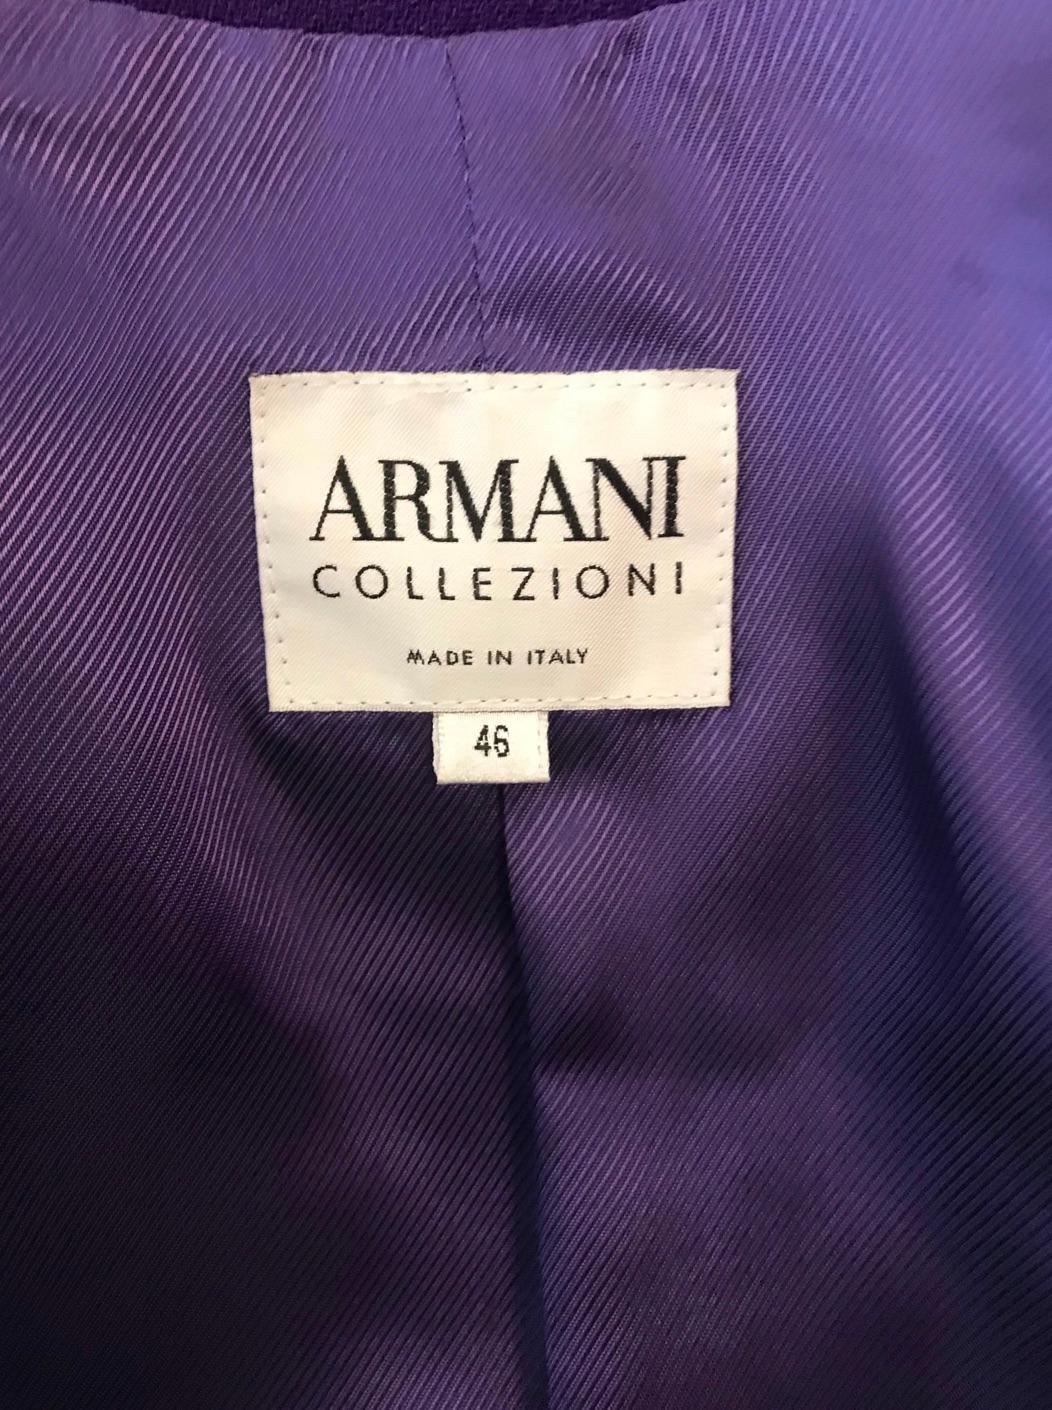 Deep purple wool jacket with shiny black patent trim from Armani Collezioni. Beautiful deep purple wool with patent trim along the collar, hemline, cuffs and pockets. Double breasted style with shiny black patent squared buttons spaced irregularly,